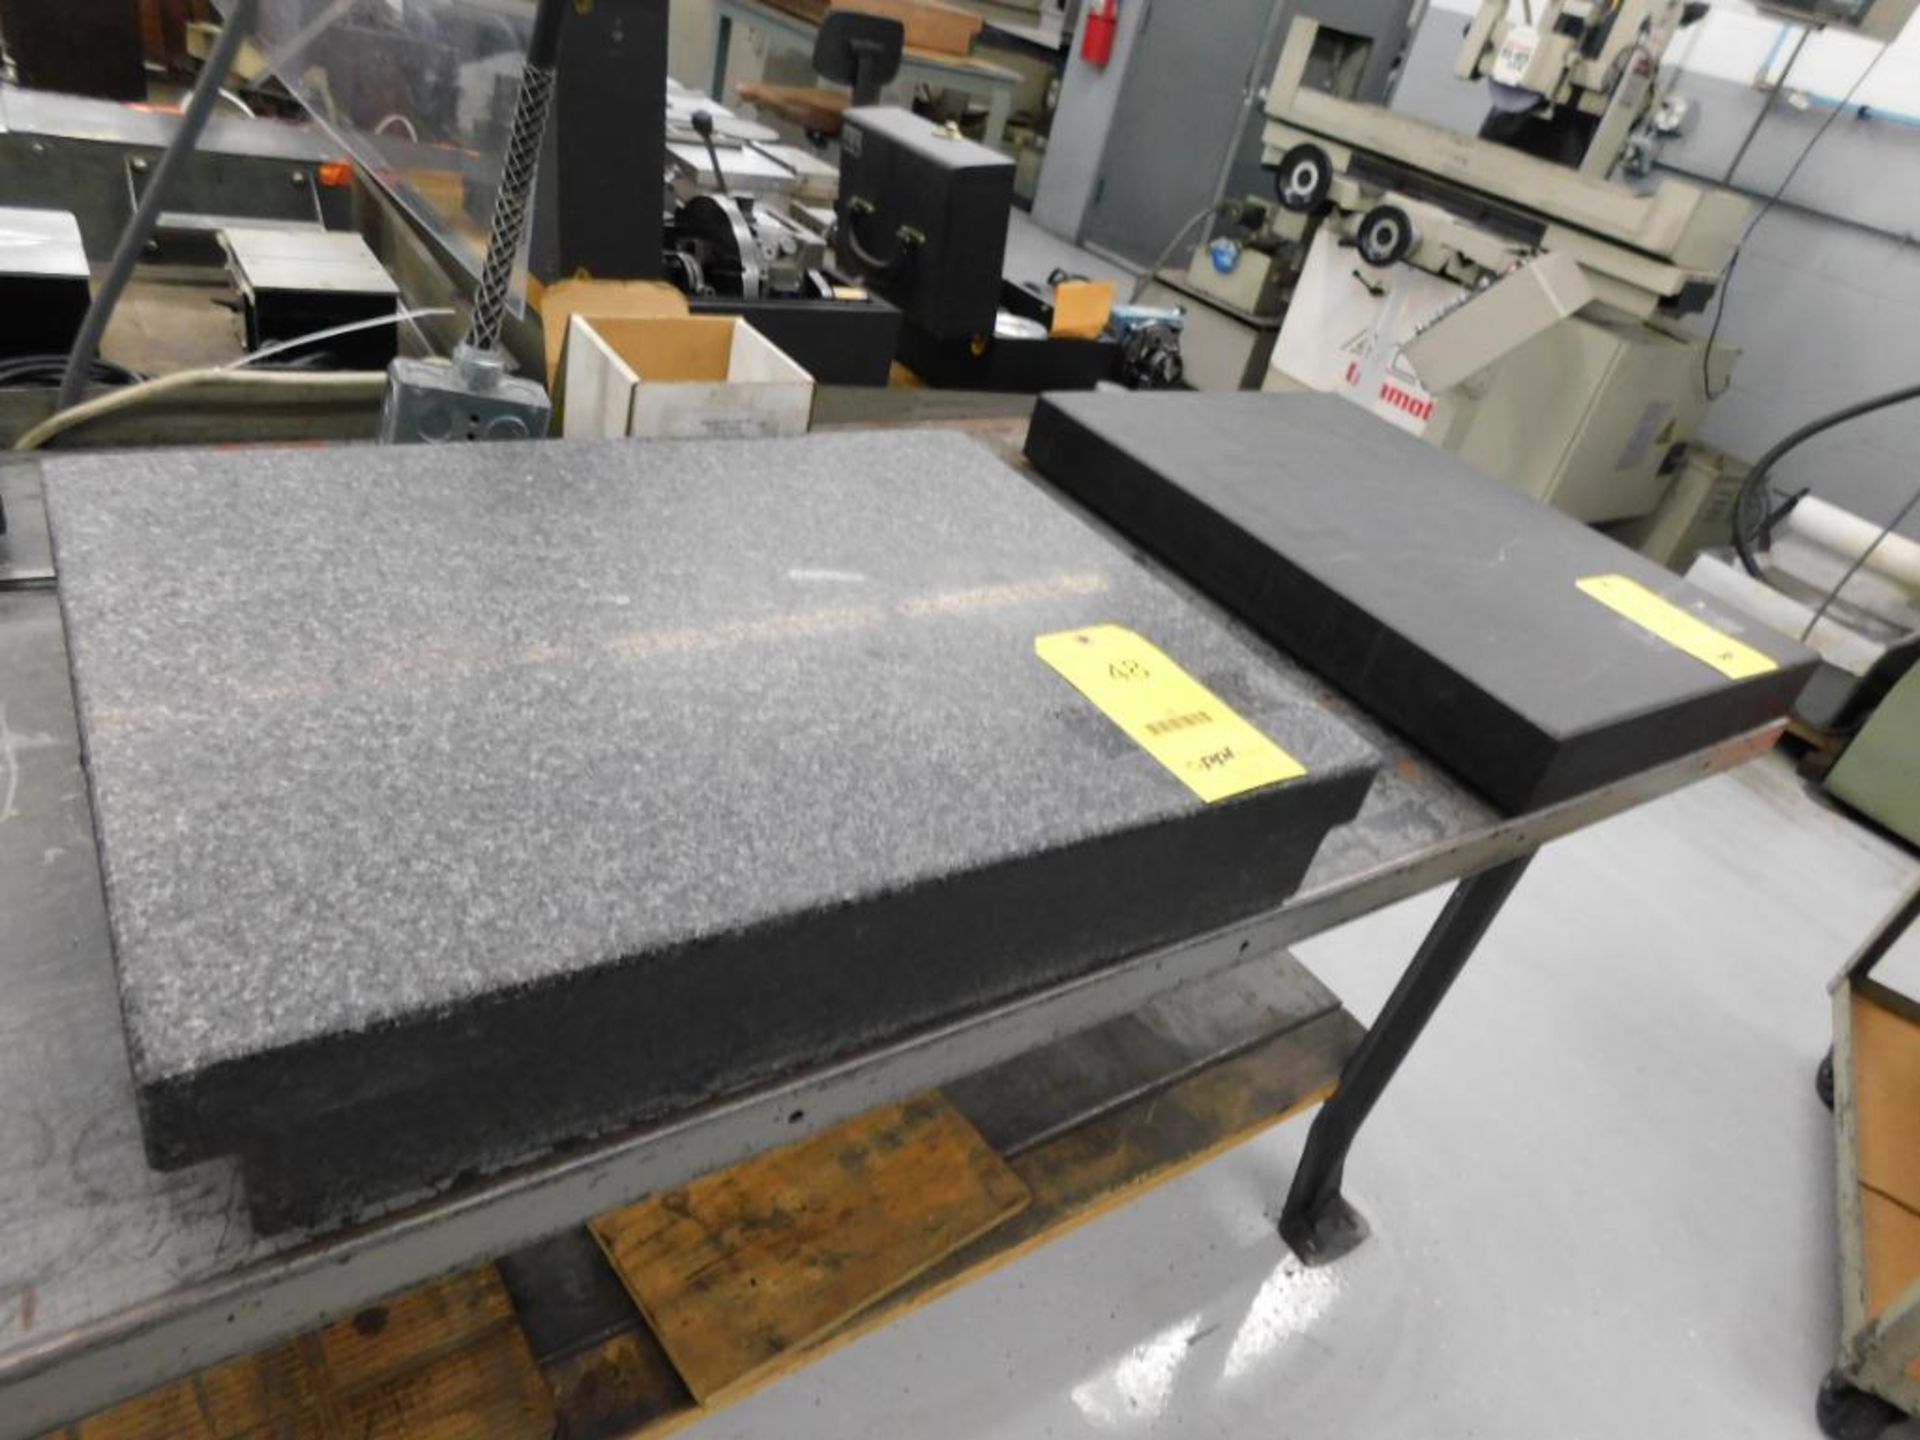 LOT: DoAll 24 in. x 18 in. x 4 in. Surface Plate, 24 in. x 18 in. x 2-3/4 in. Surface Plate